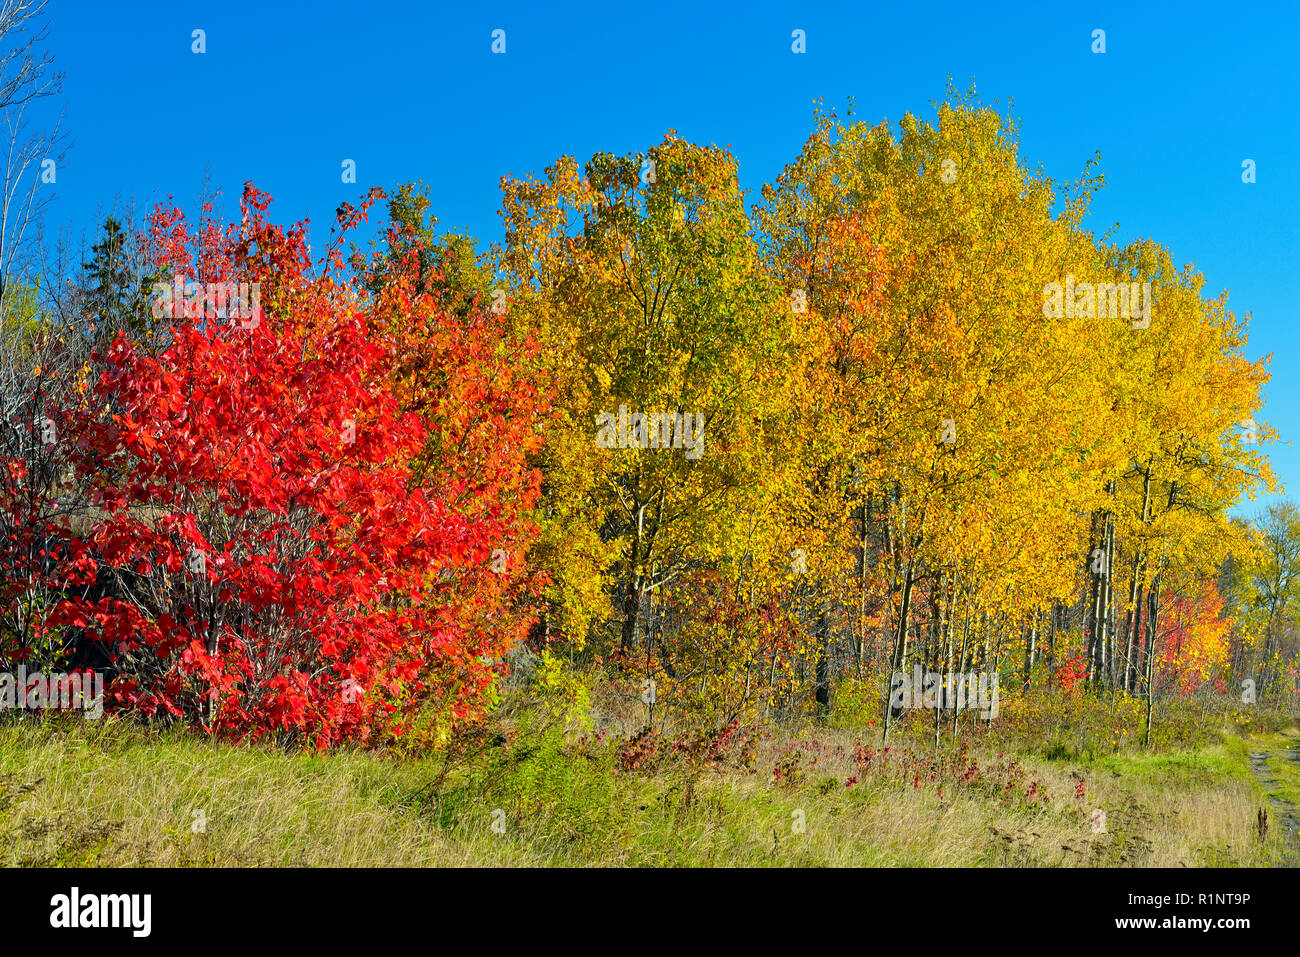 Autumn foliage in a red maple near a stand of aspens, Greater Sudbury, Ontario, Canada Stock Photo